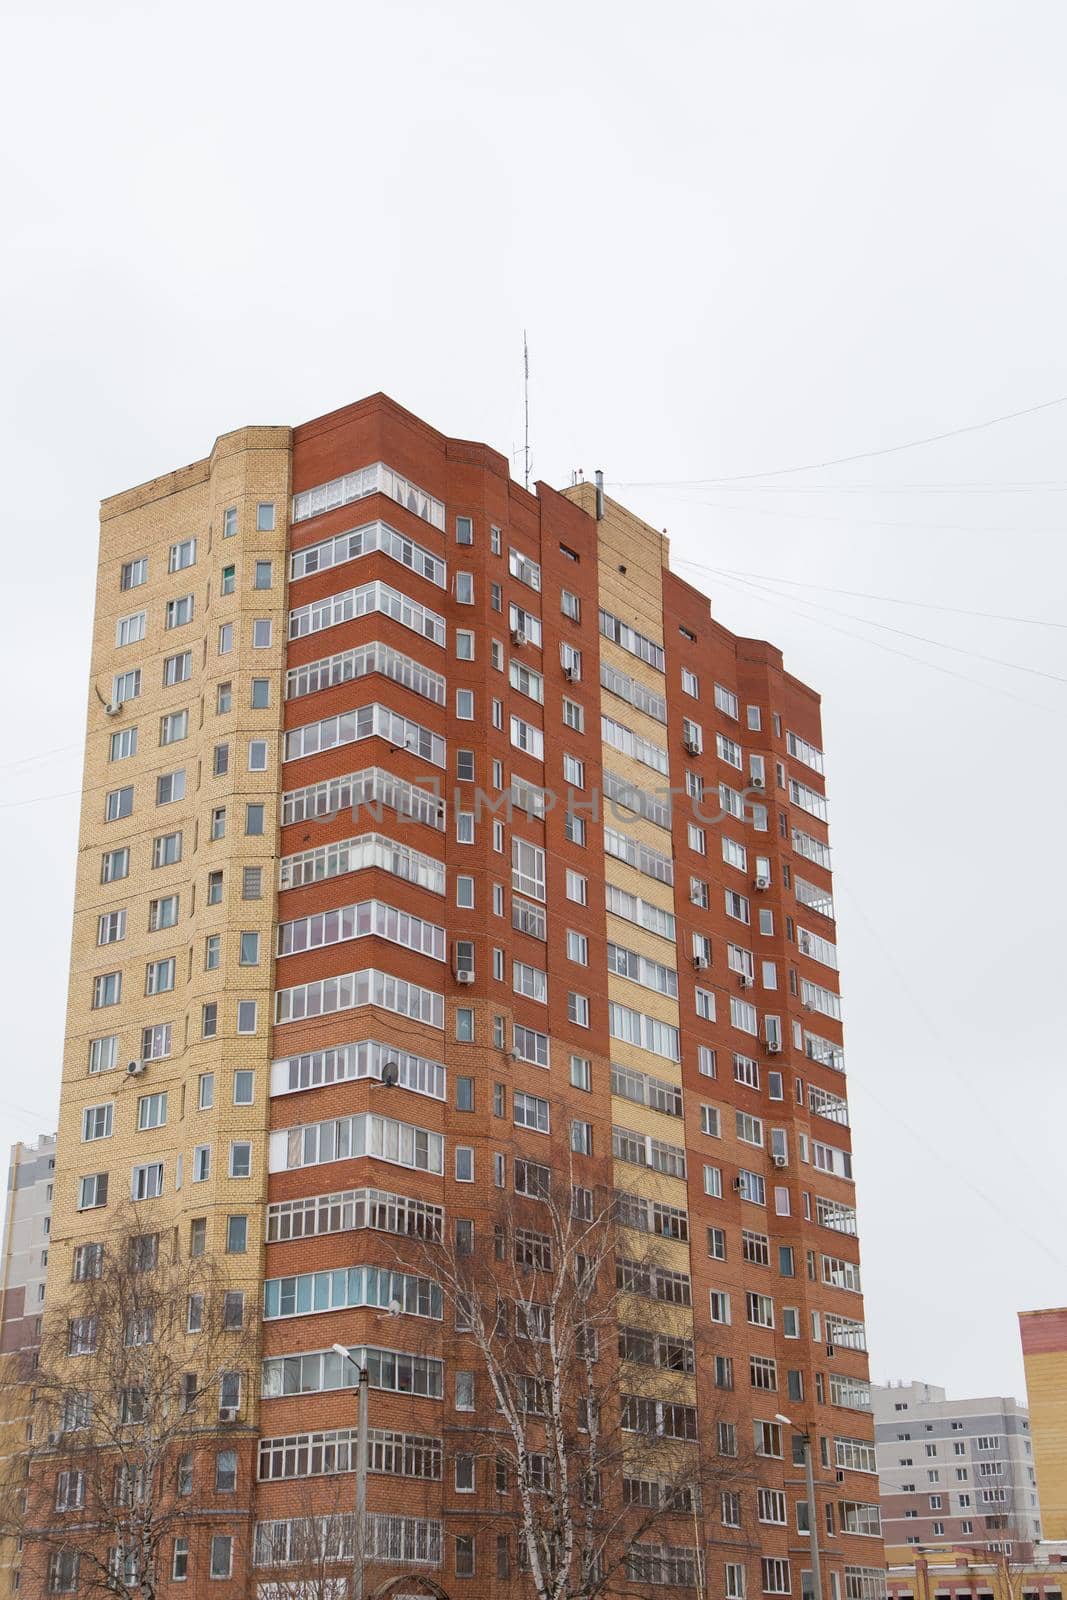 Residential high-rise building made of red and yellow bricks with balconies. Against the background of the gray sky. Modern new buildings, building facades. Real estate and urban architecture concept.